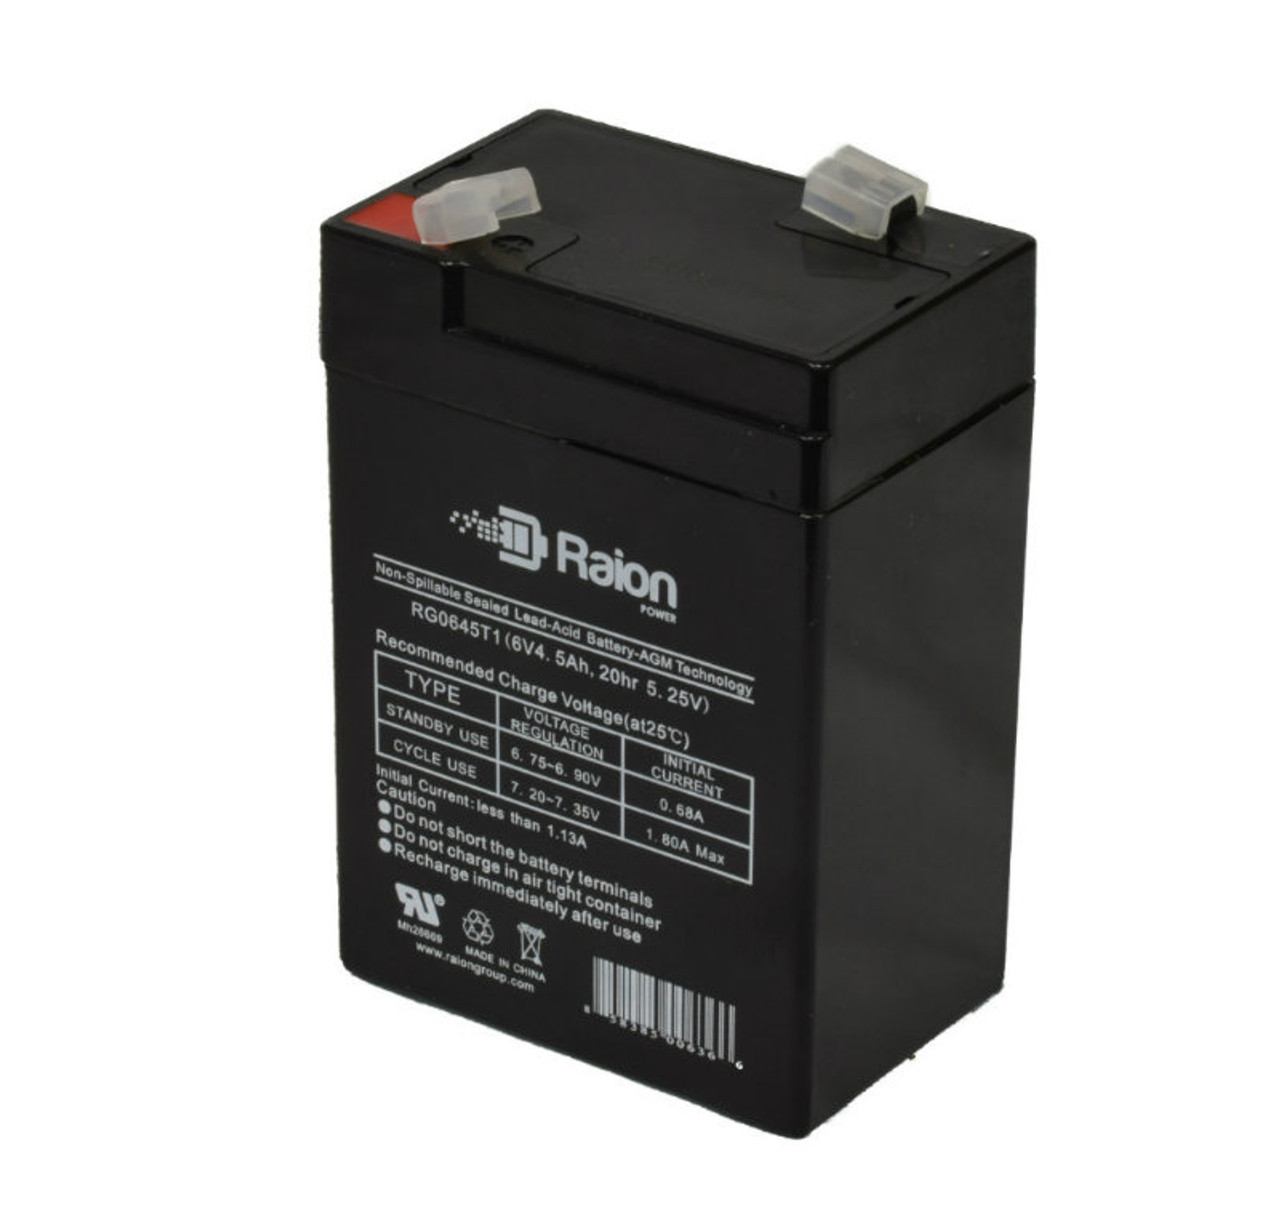 Raion Power RG0645T1 6V 4.5Ah Replacement Battery Cartridge for MUST FC6-5